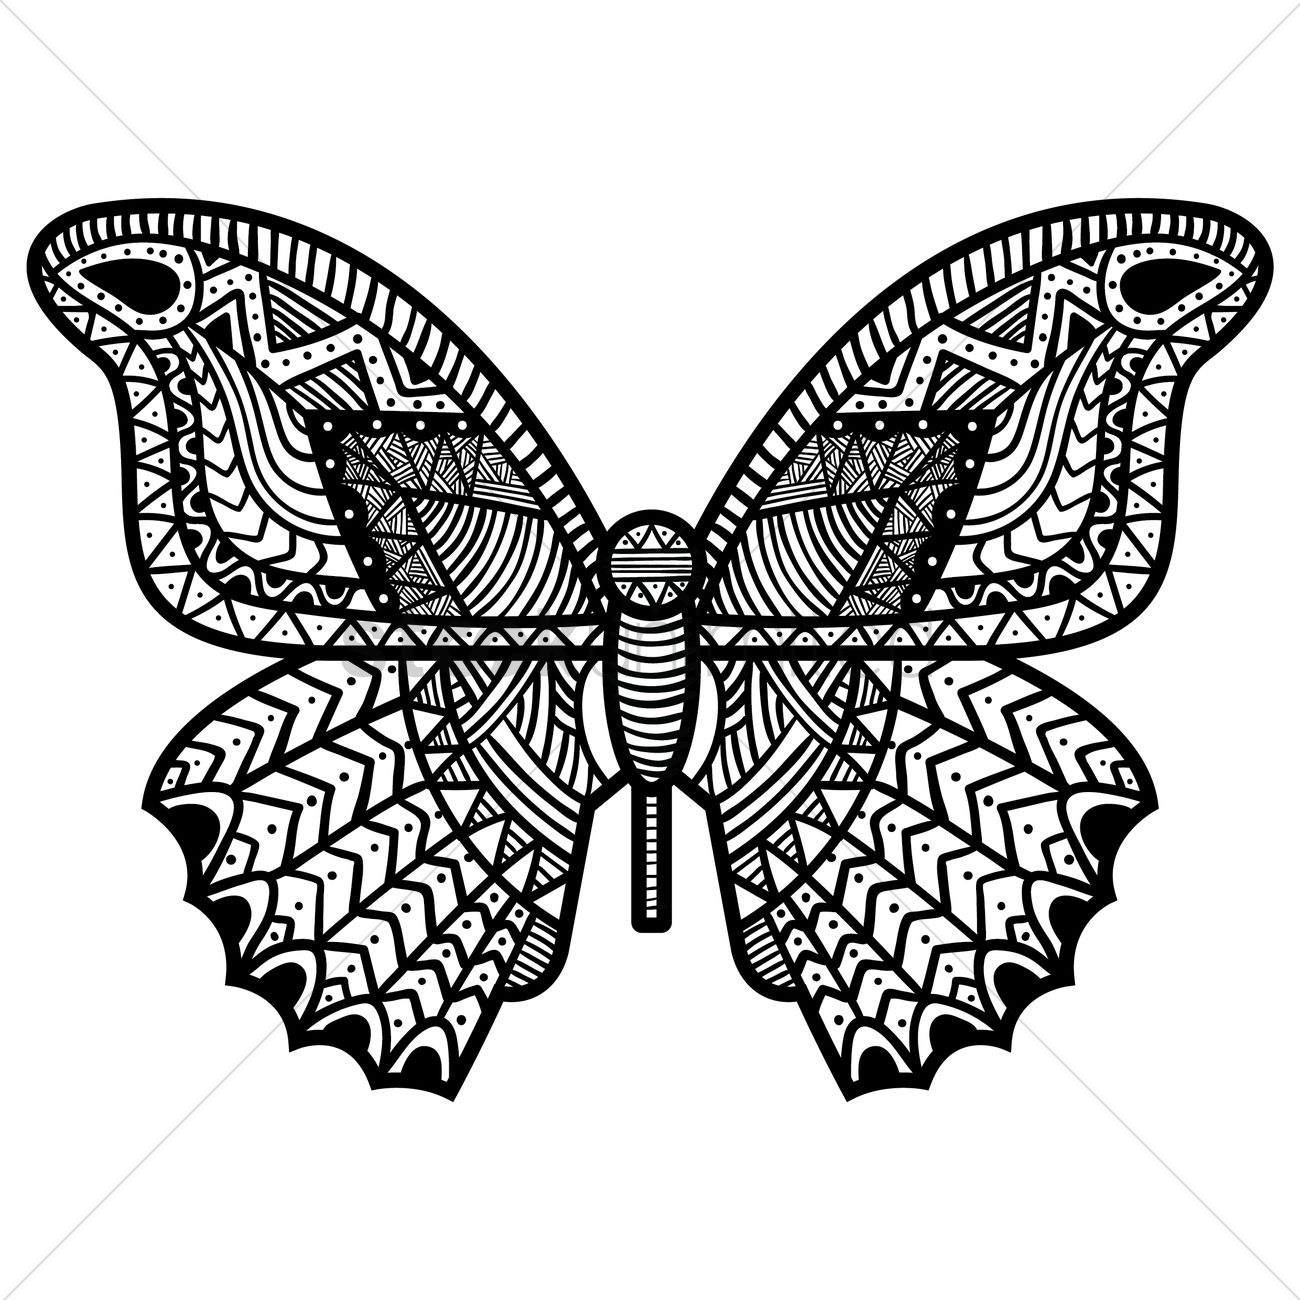 Huge intricate butterfly with geometric pattern tattoo design